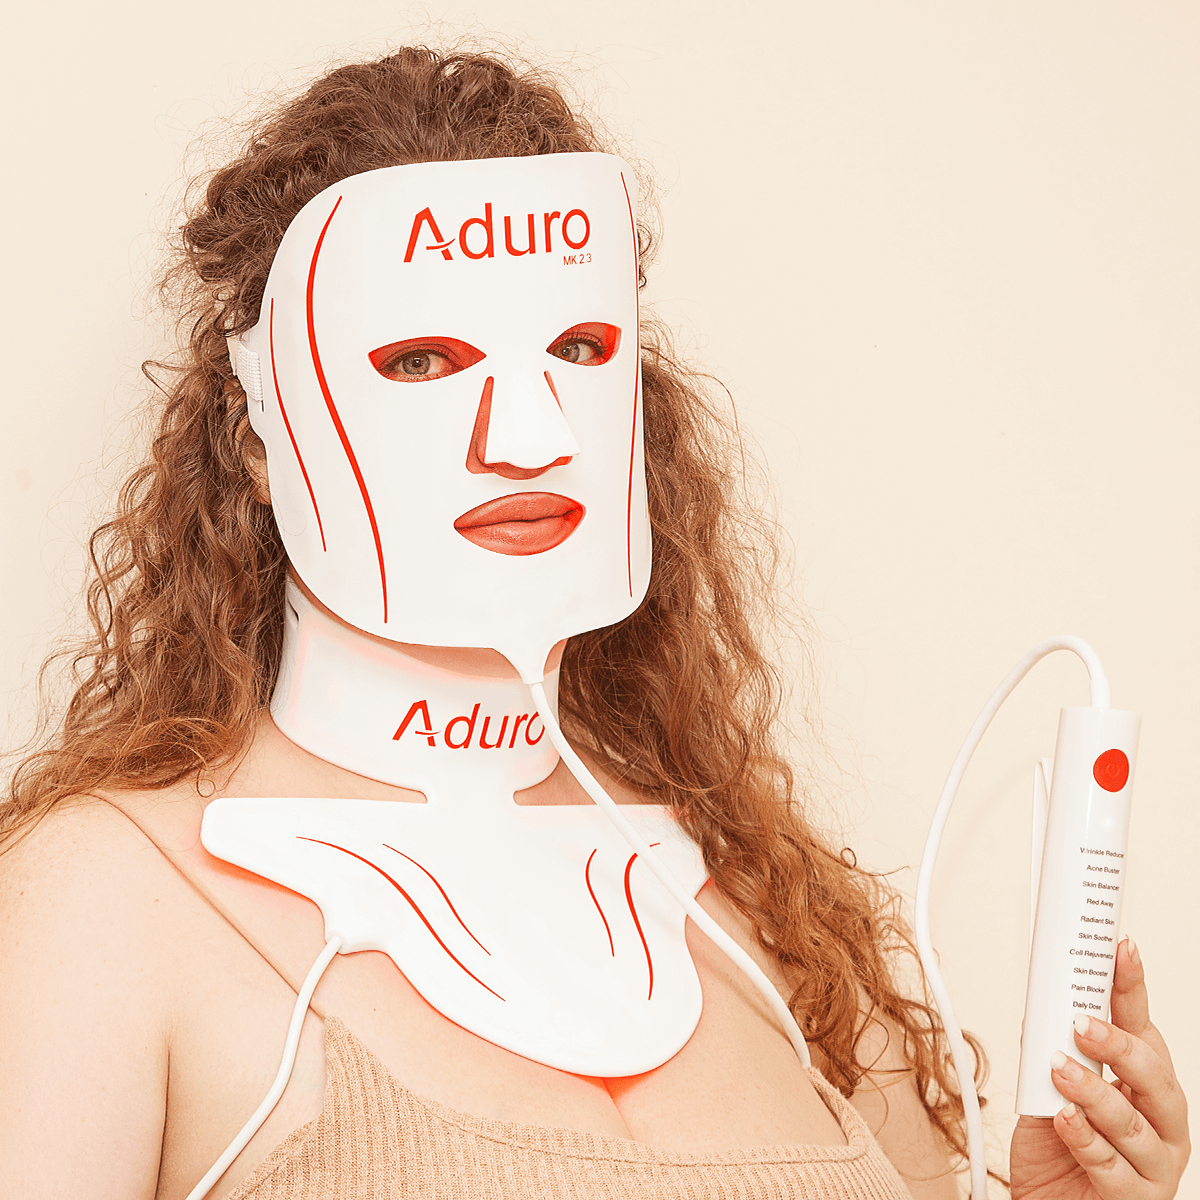 Aduro Facial mask and Neck Mask being used Skin health